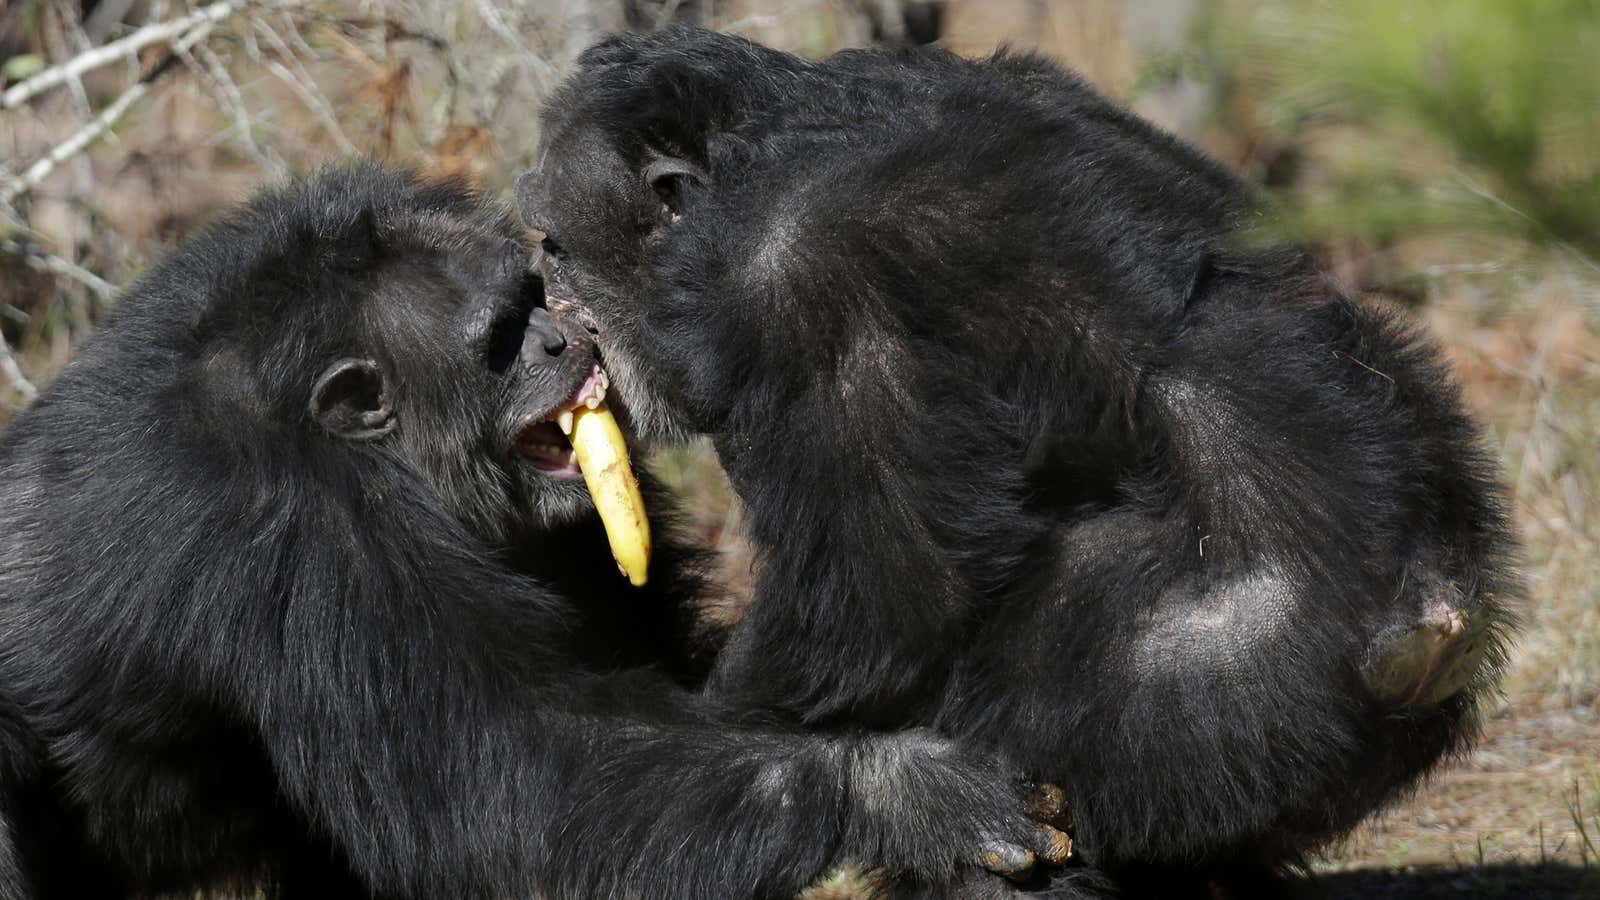 Chimps: They’re (almost) just like us.